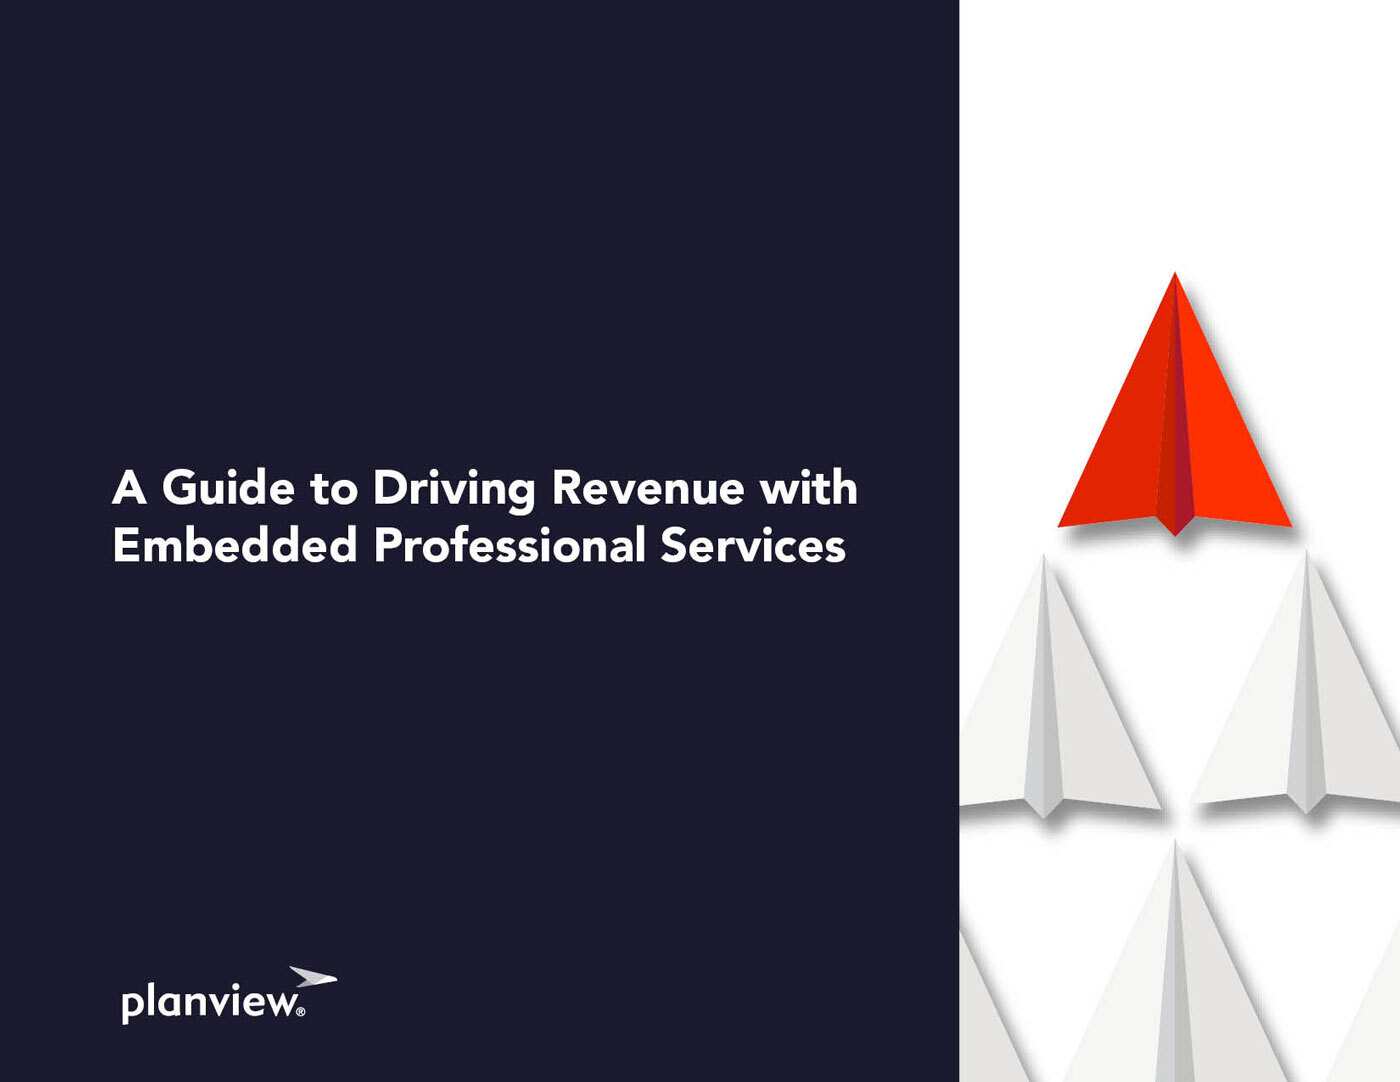 A Guide to Driving Revenue With Embedded Professional Services